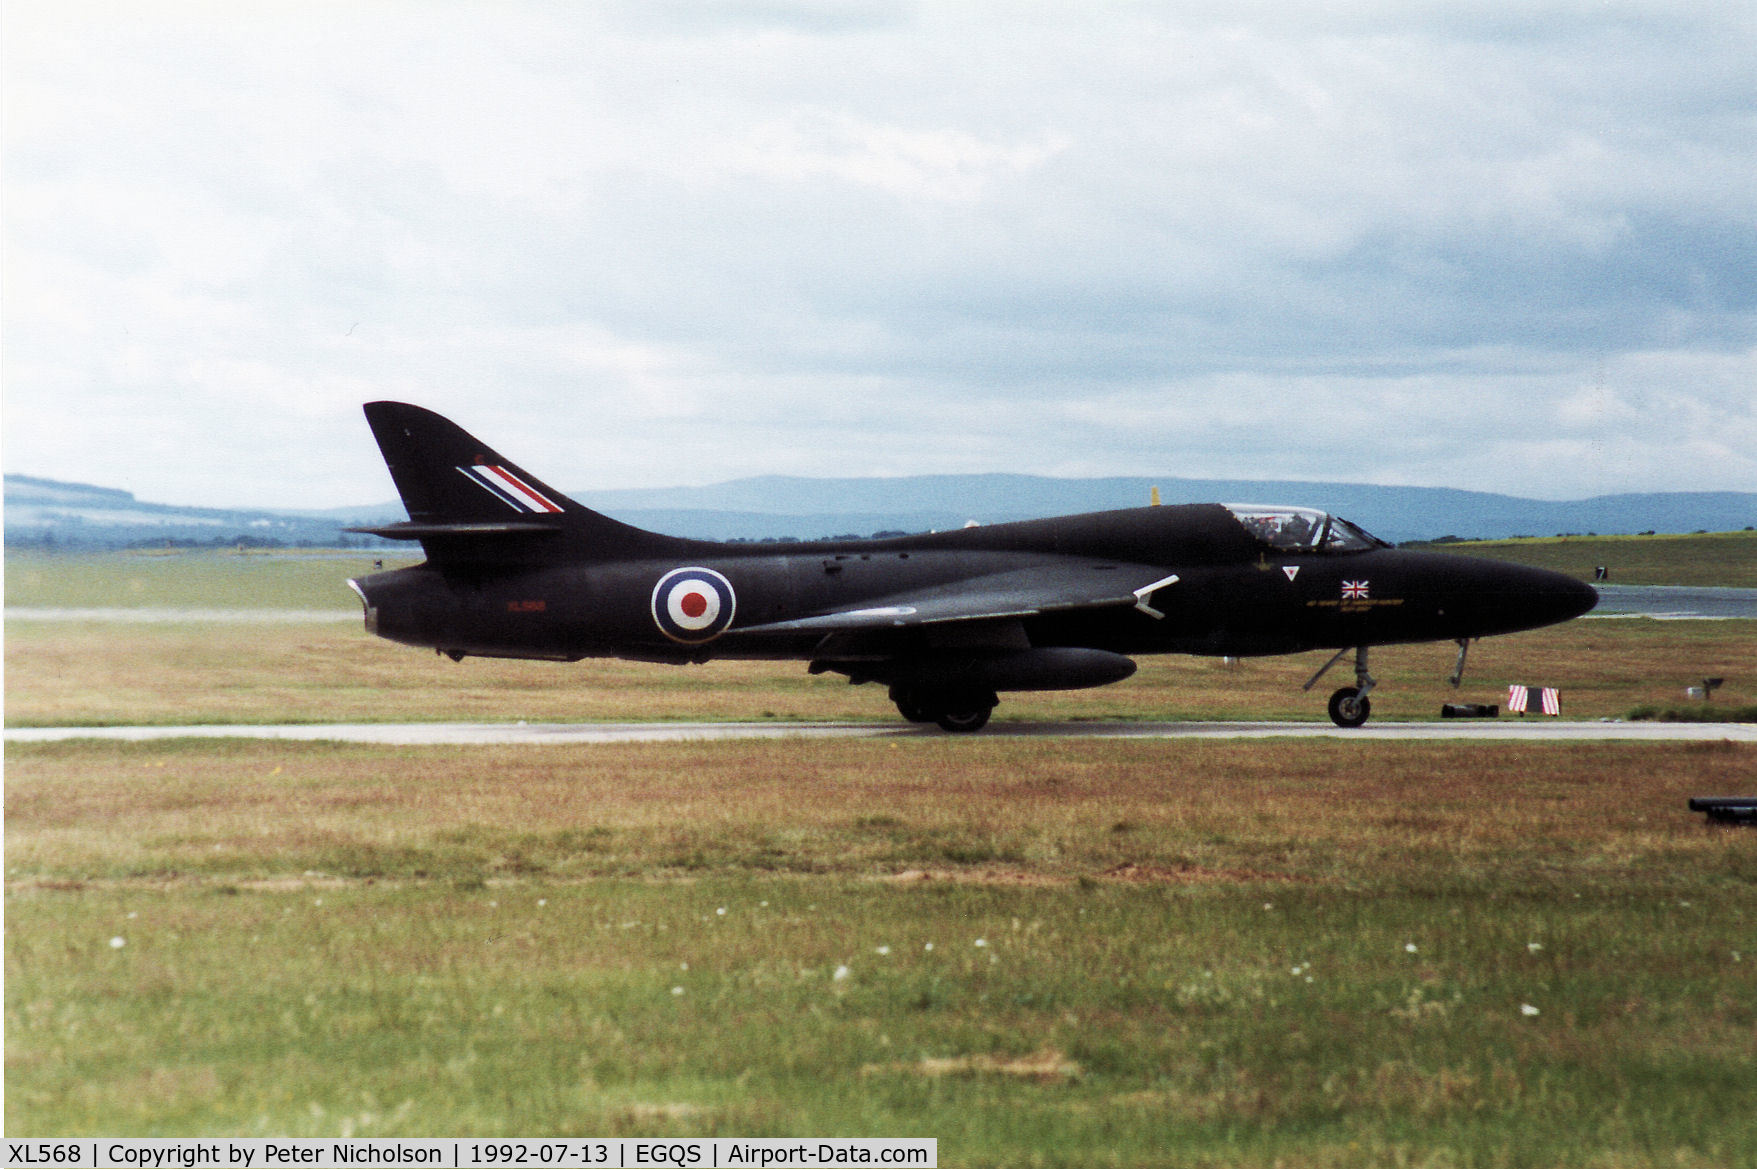 XL568, 1958 Hawker Hunter T.7A C/N 41H-693719, Hunter T.7A of 208 Squadron awaiting clearance to join the active runway at RAF Lossiemouth in the Summer of 1992.